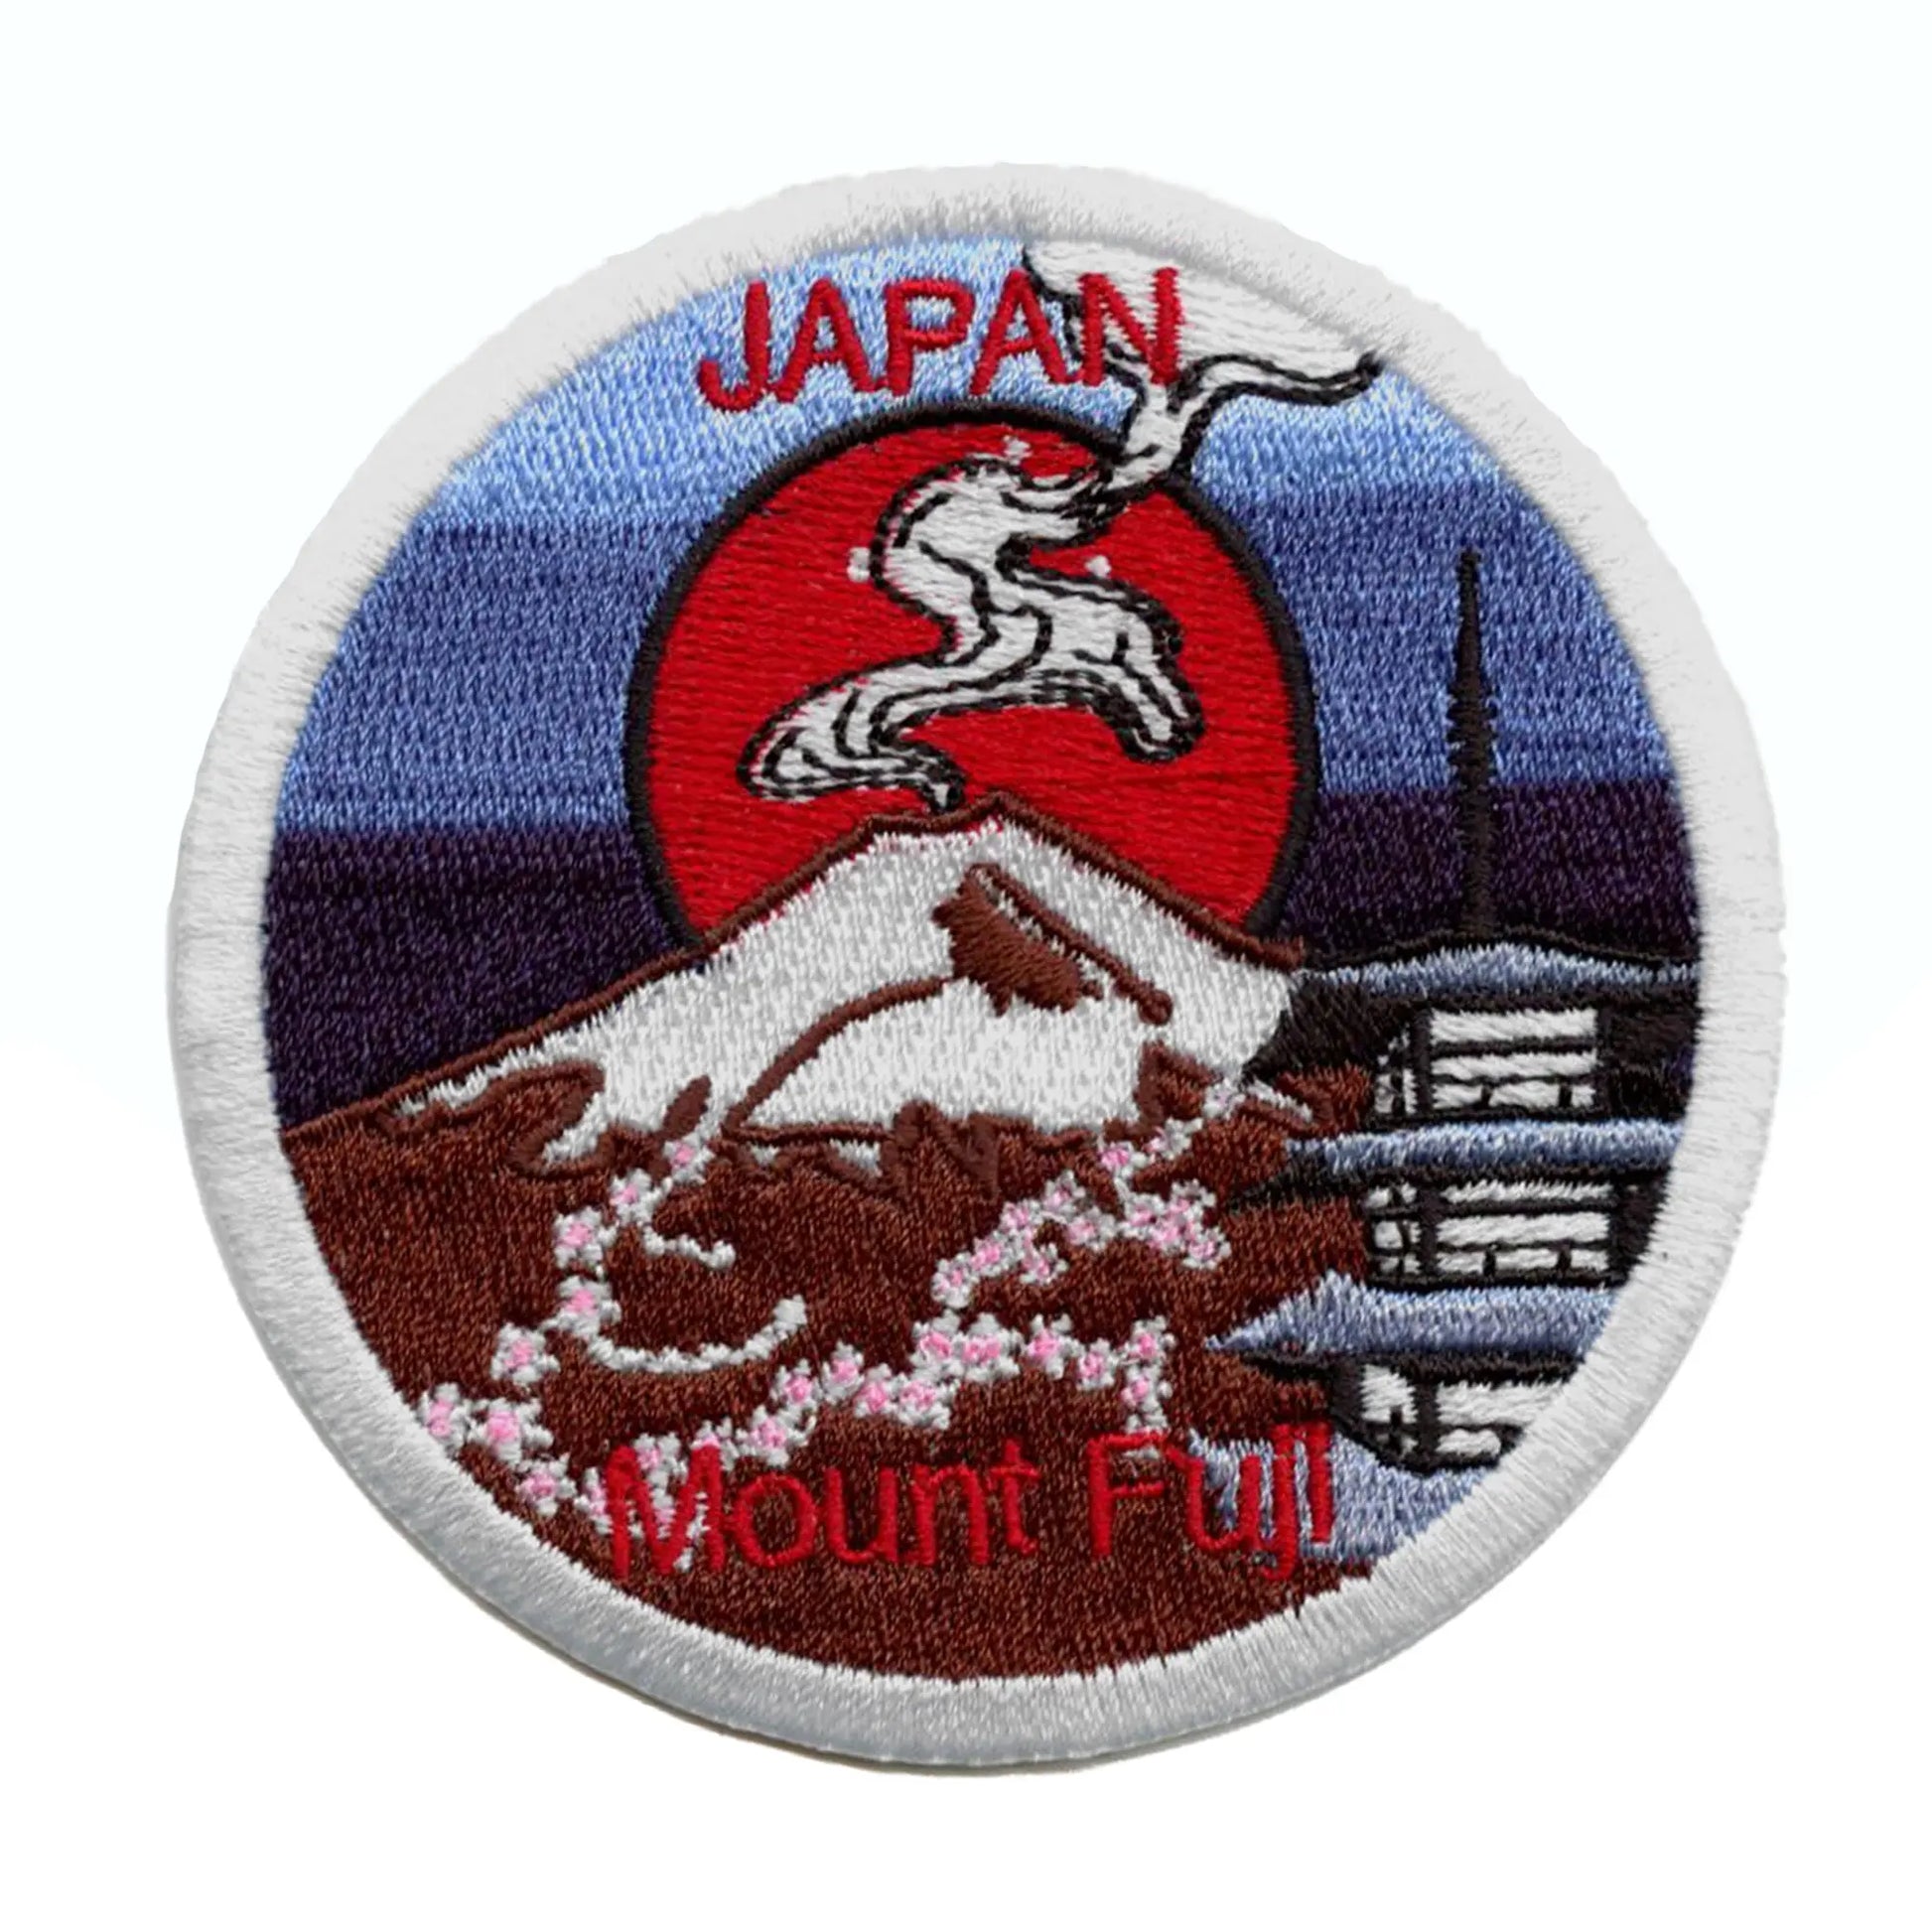 Japan Mount Fuji Travel Patch Cherry Blossom Architecture Embroidered Iron On